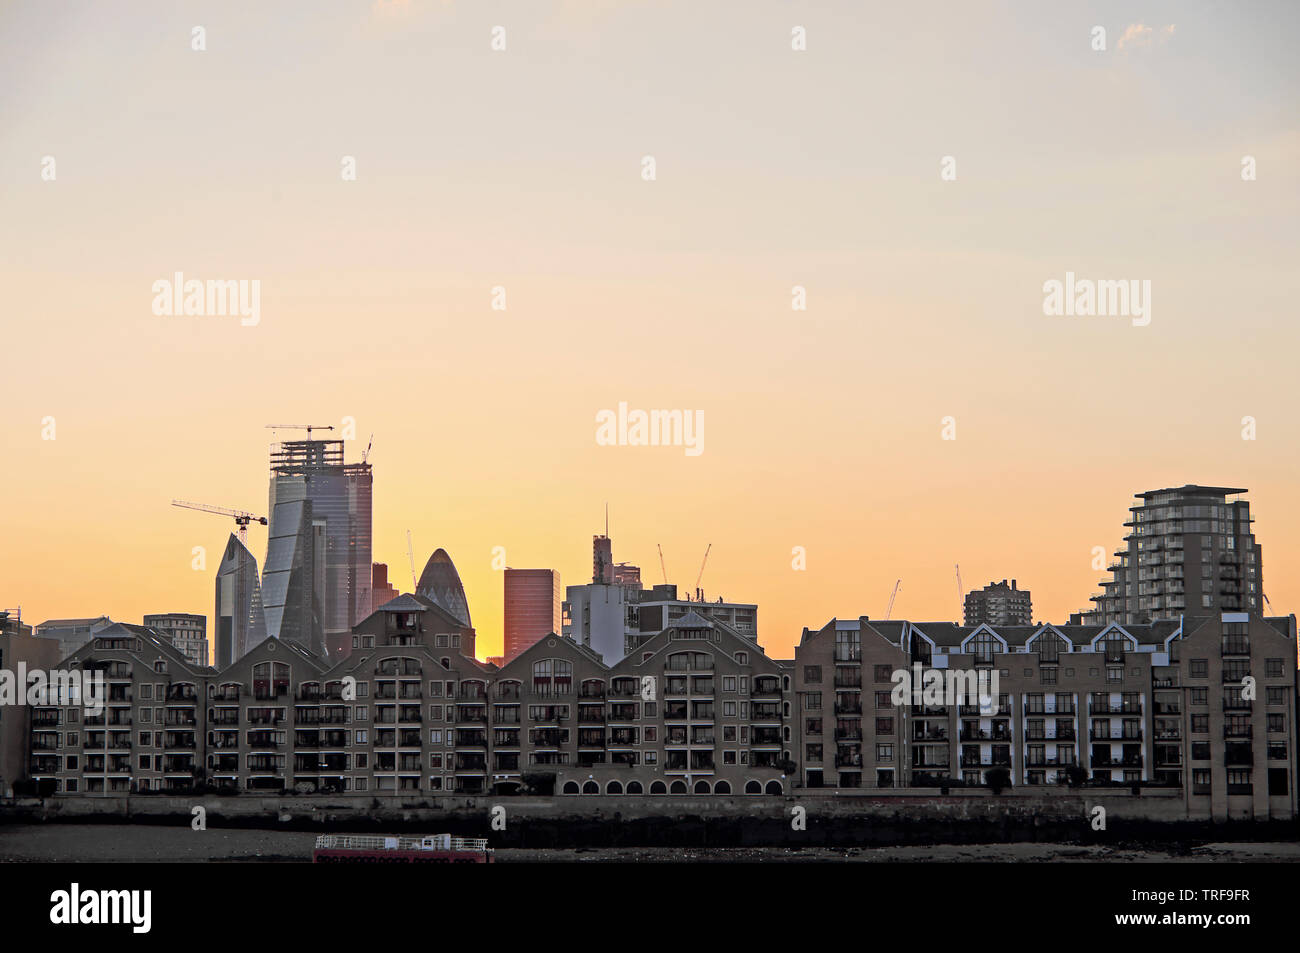 Wapping row of terraced houses apartments on River Thames riverside waterfront & view of the City of London & Shard from Rotherhithe UK  KATHY DEWITT Stock Photo